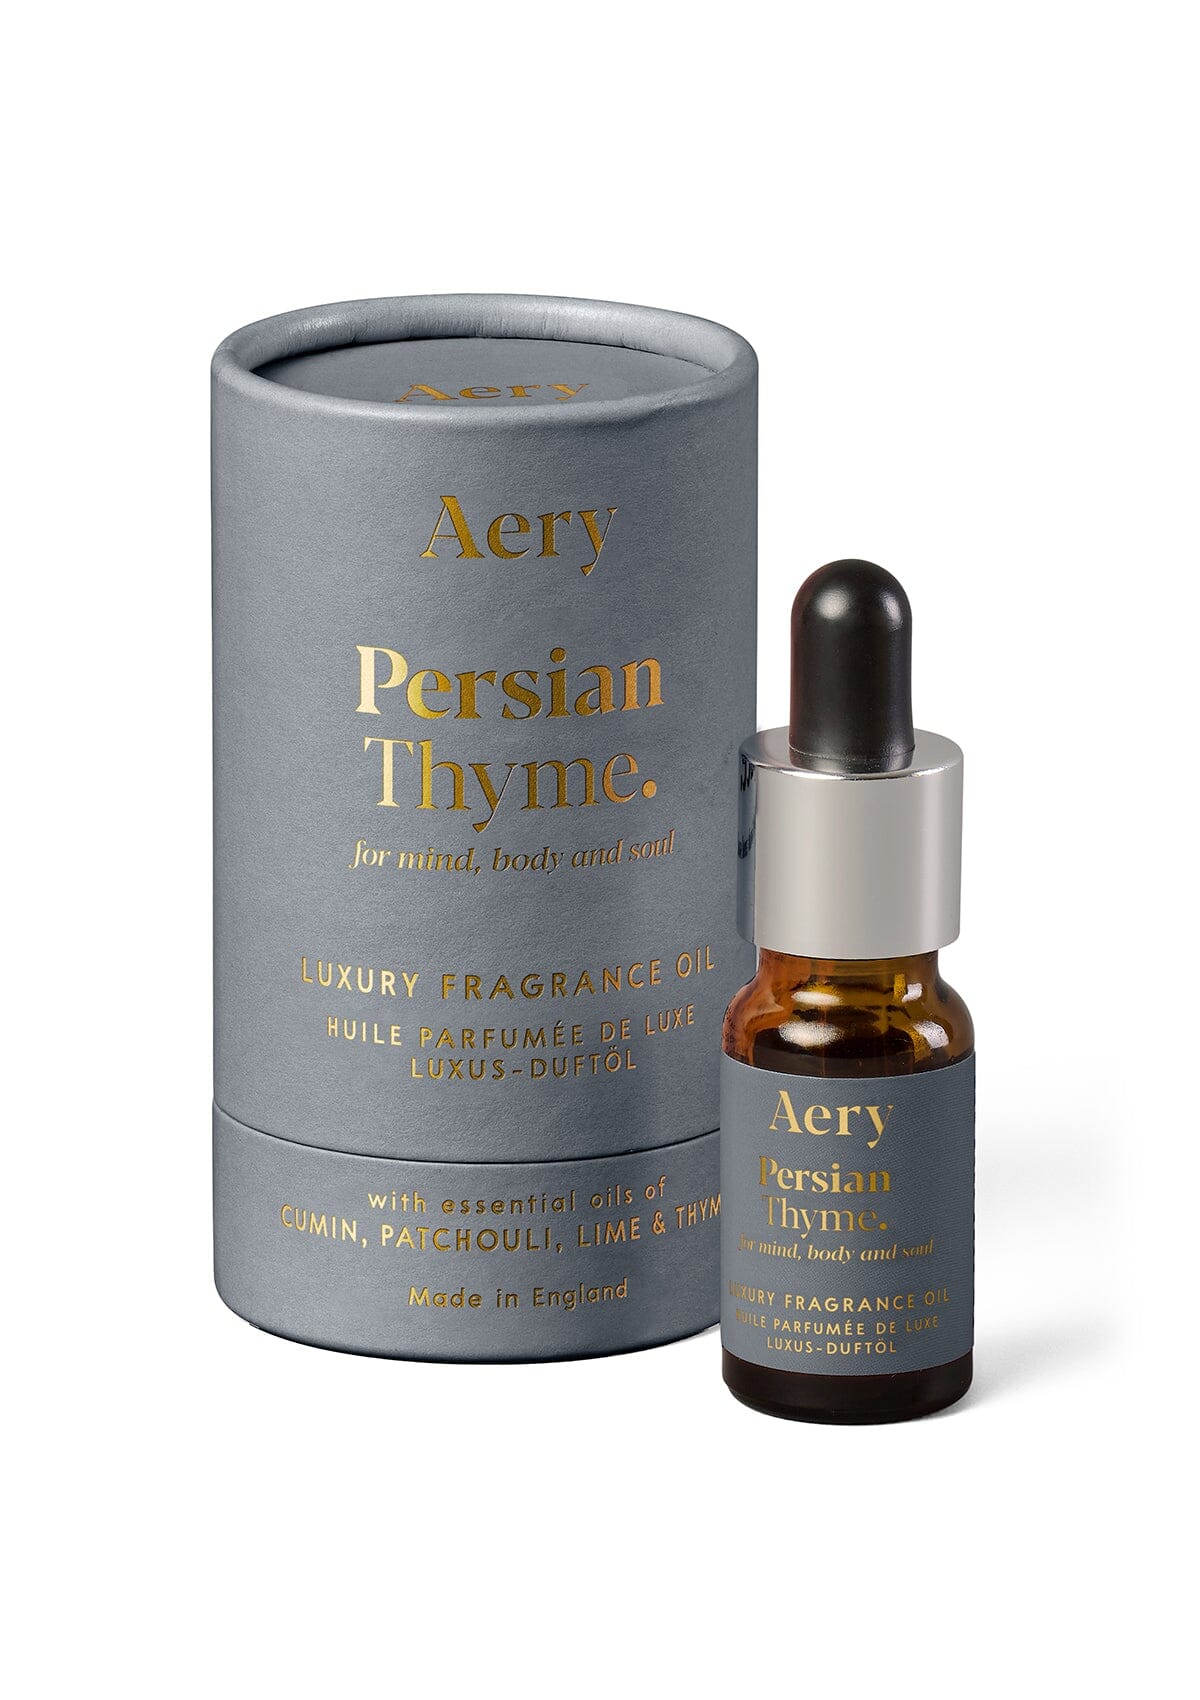 Grey Persian Thyme fragrance oil displayed next to product packaging by Aery on white background 